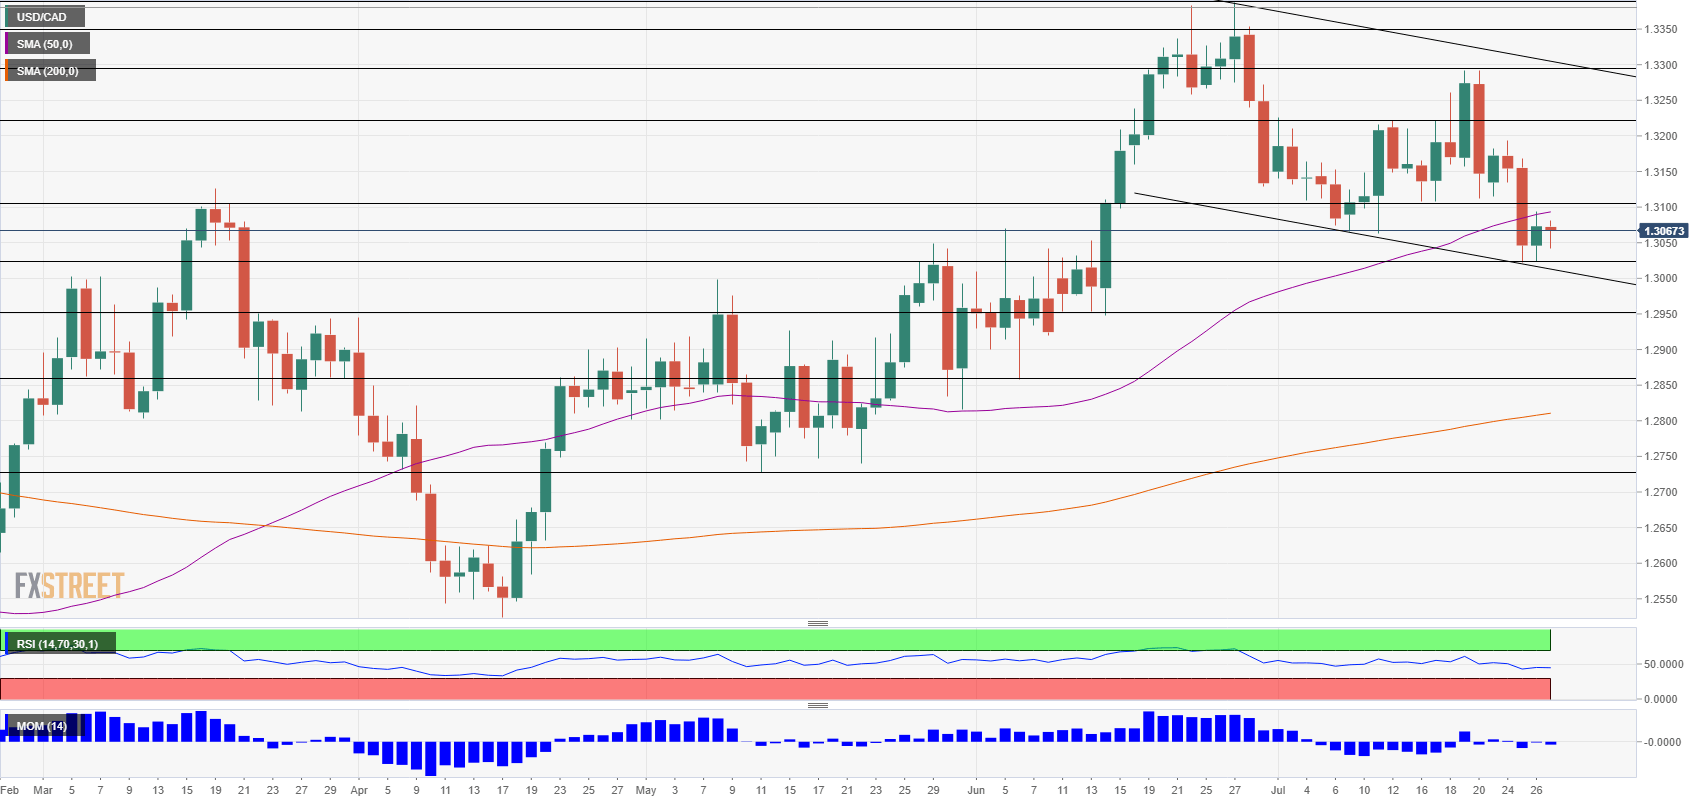 USD CAD technical analysis July 27 August 3 2018